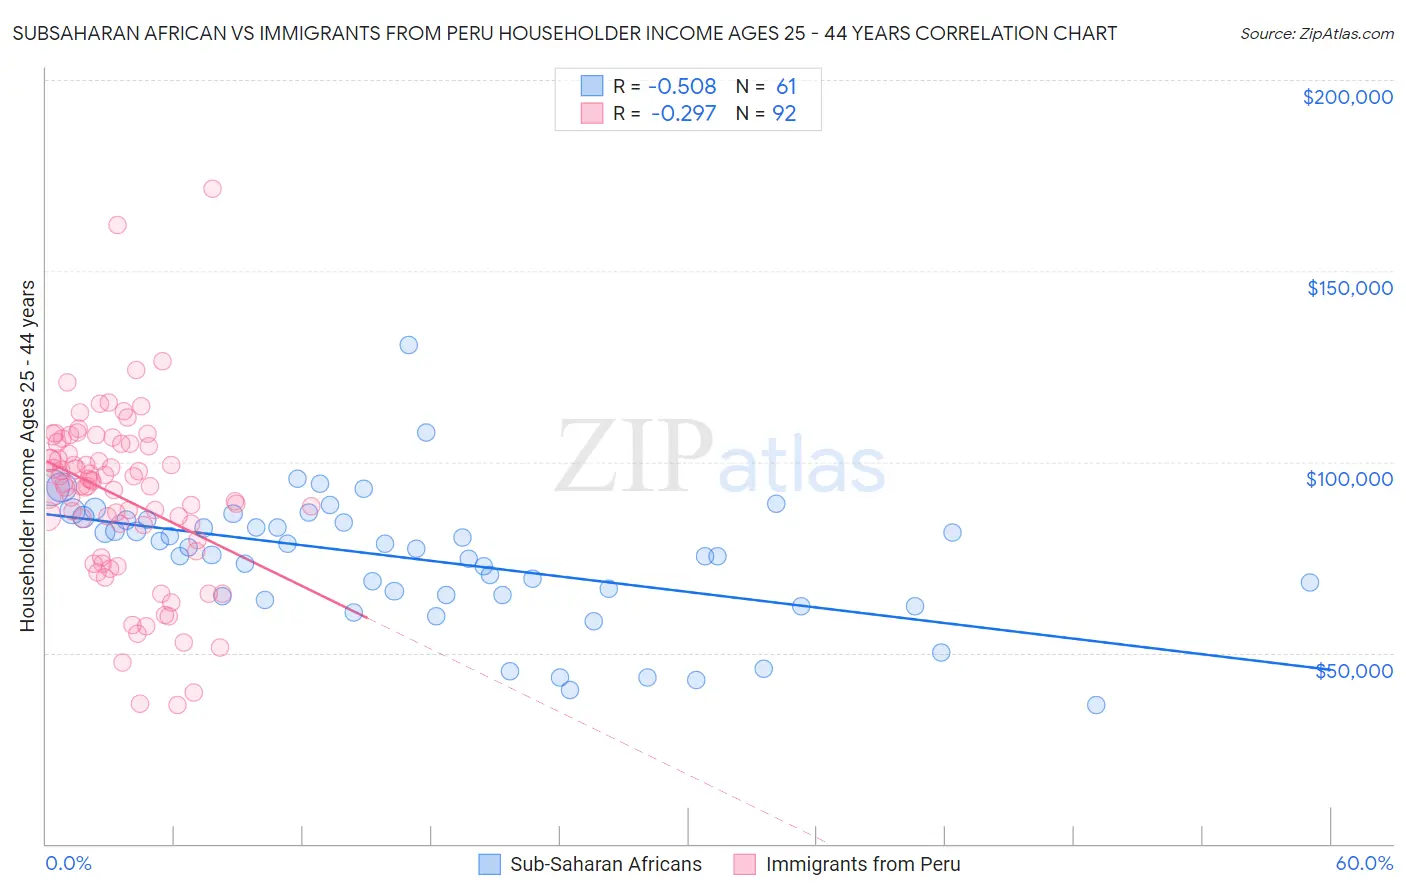 Subsaharan African vs Immigrants from Peru Householder Income Ages 25 - 44 years